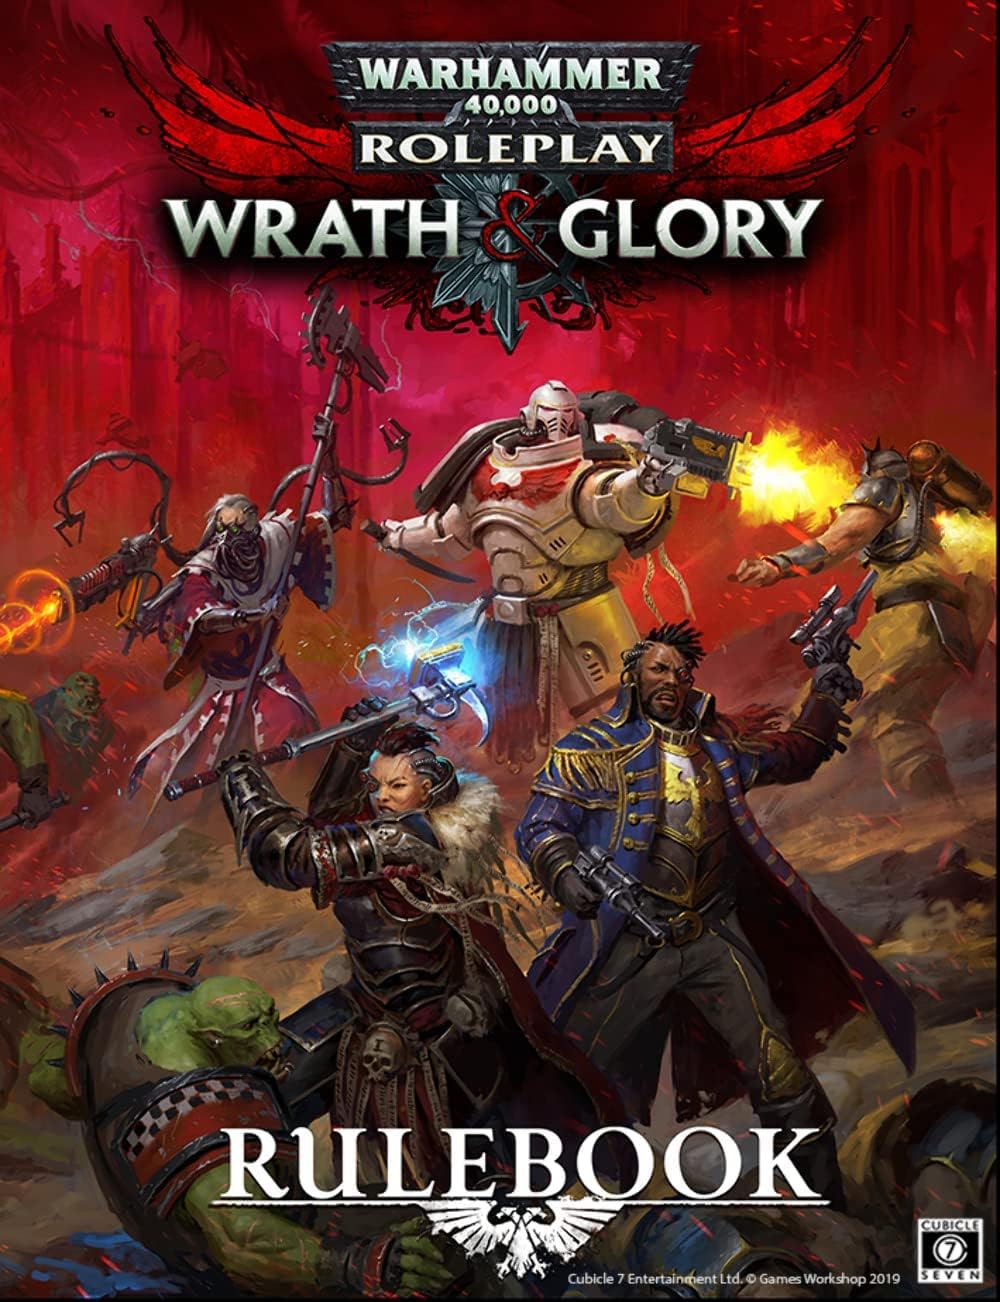 Warhammer 40k: Wrath & Glory (and other 40k RPGs)